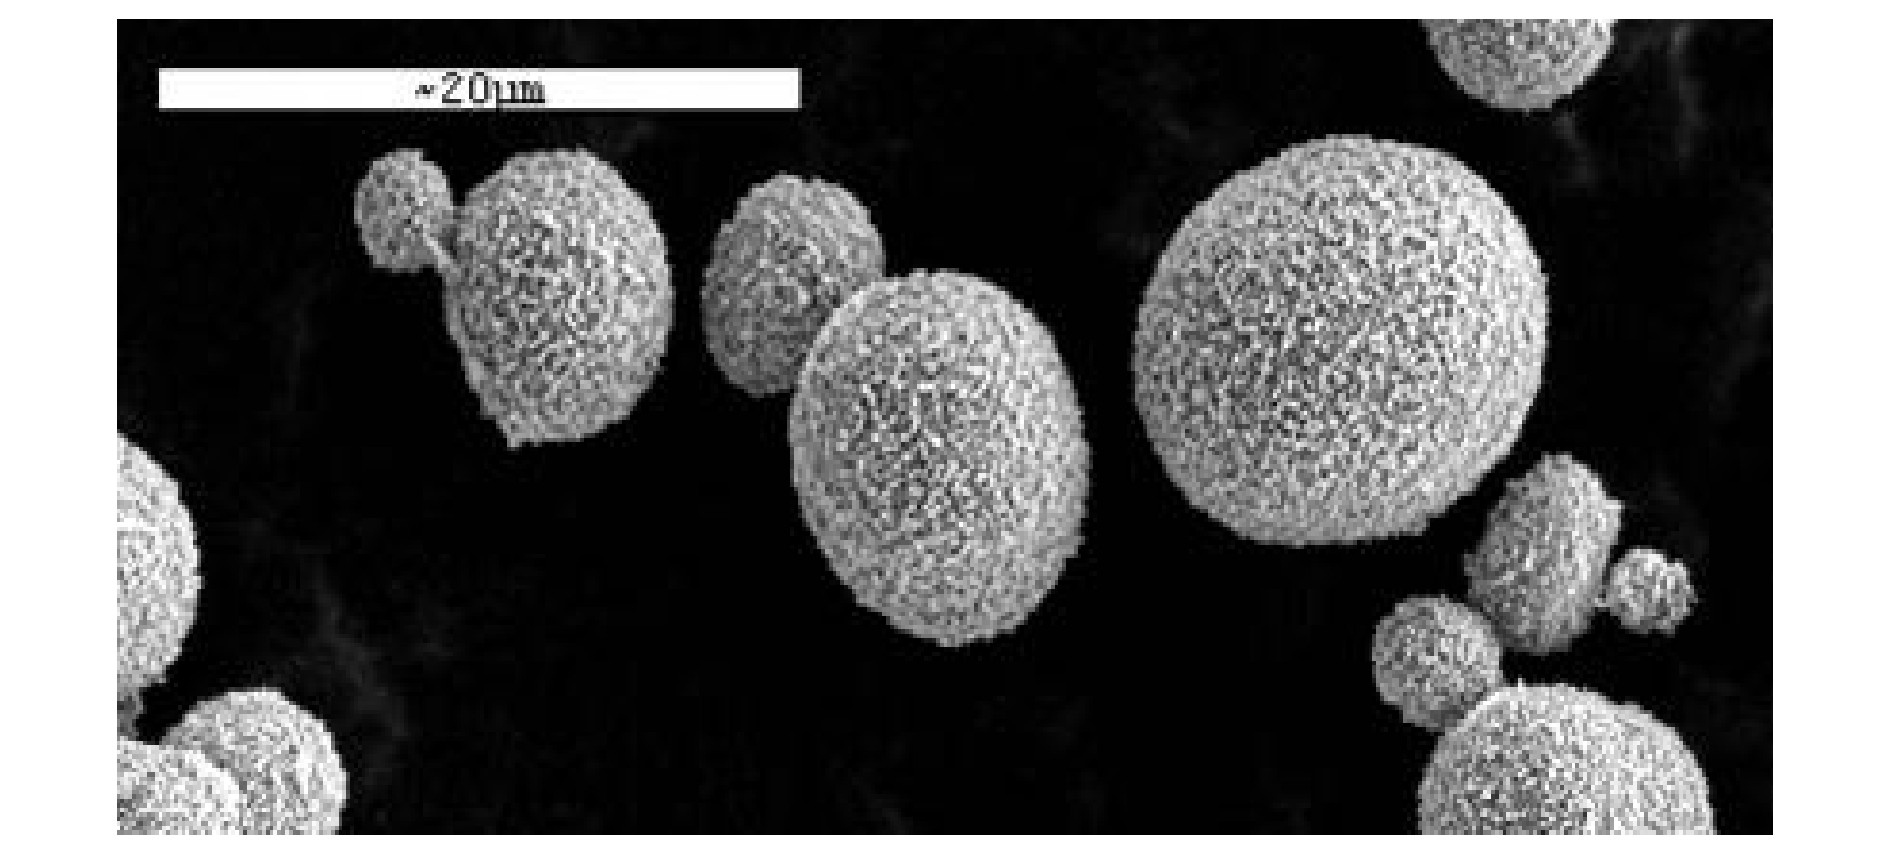 图8 包覆Co (OH) 2的球形
Ni (OH) 2的SEM照片
Fig.8 TEM image of Co (OH) 2 coated 
spherical Ni (OH) 2